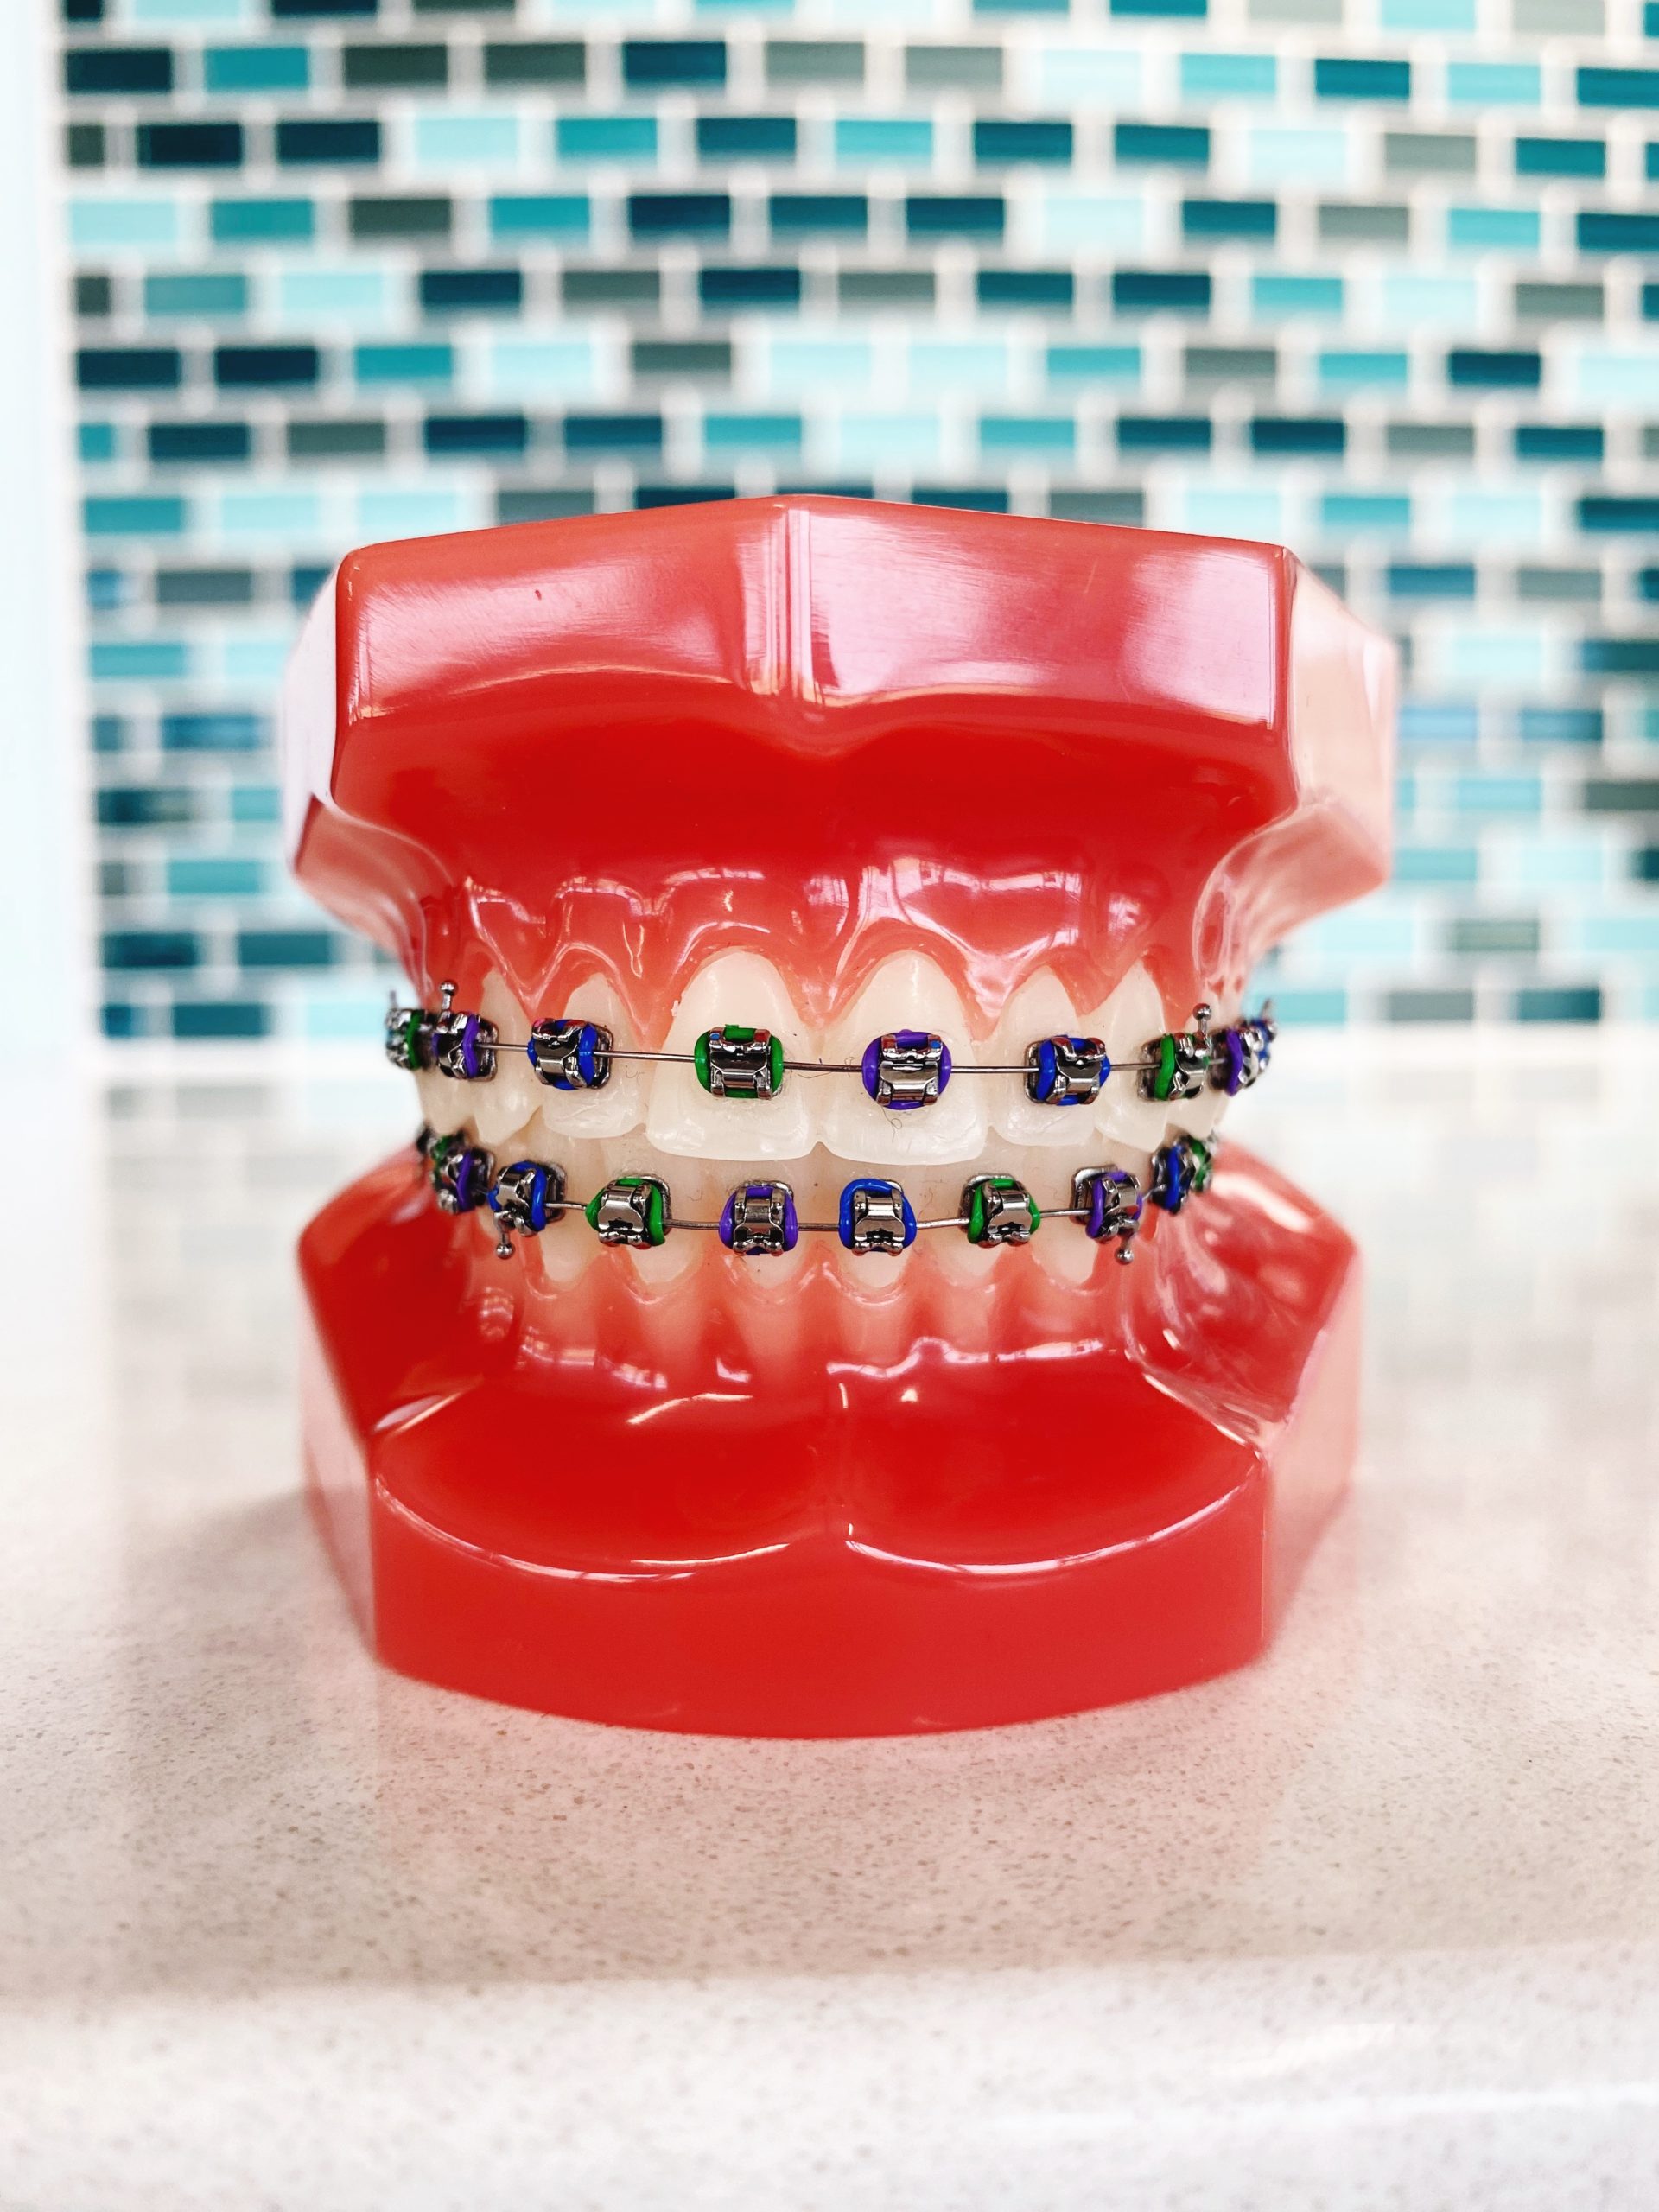 Braces Rubber Band Colors: Royal blue, emerald green and dark purple